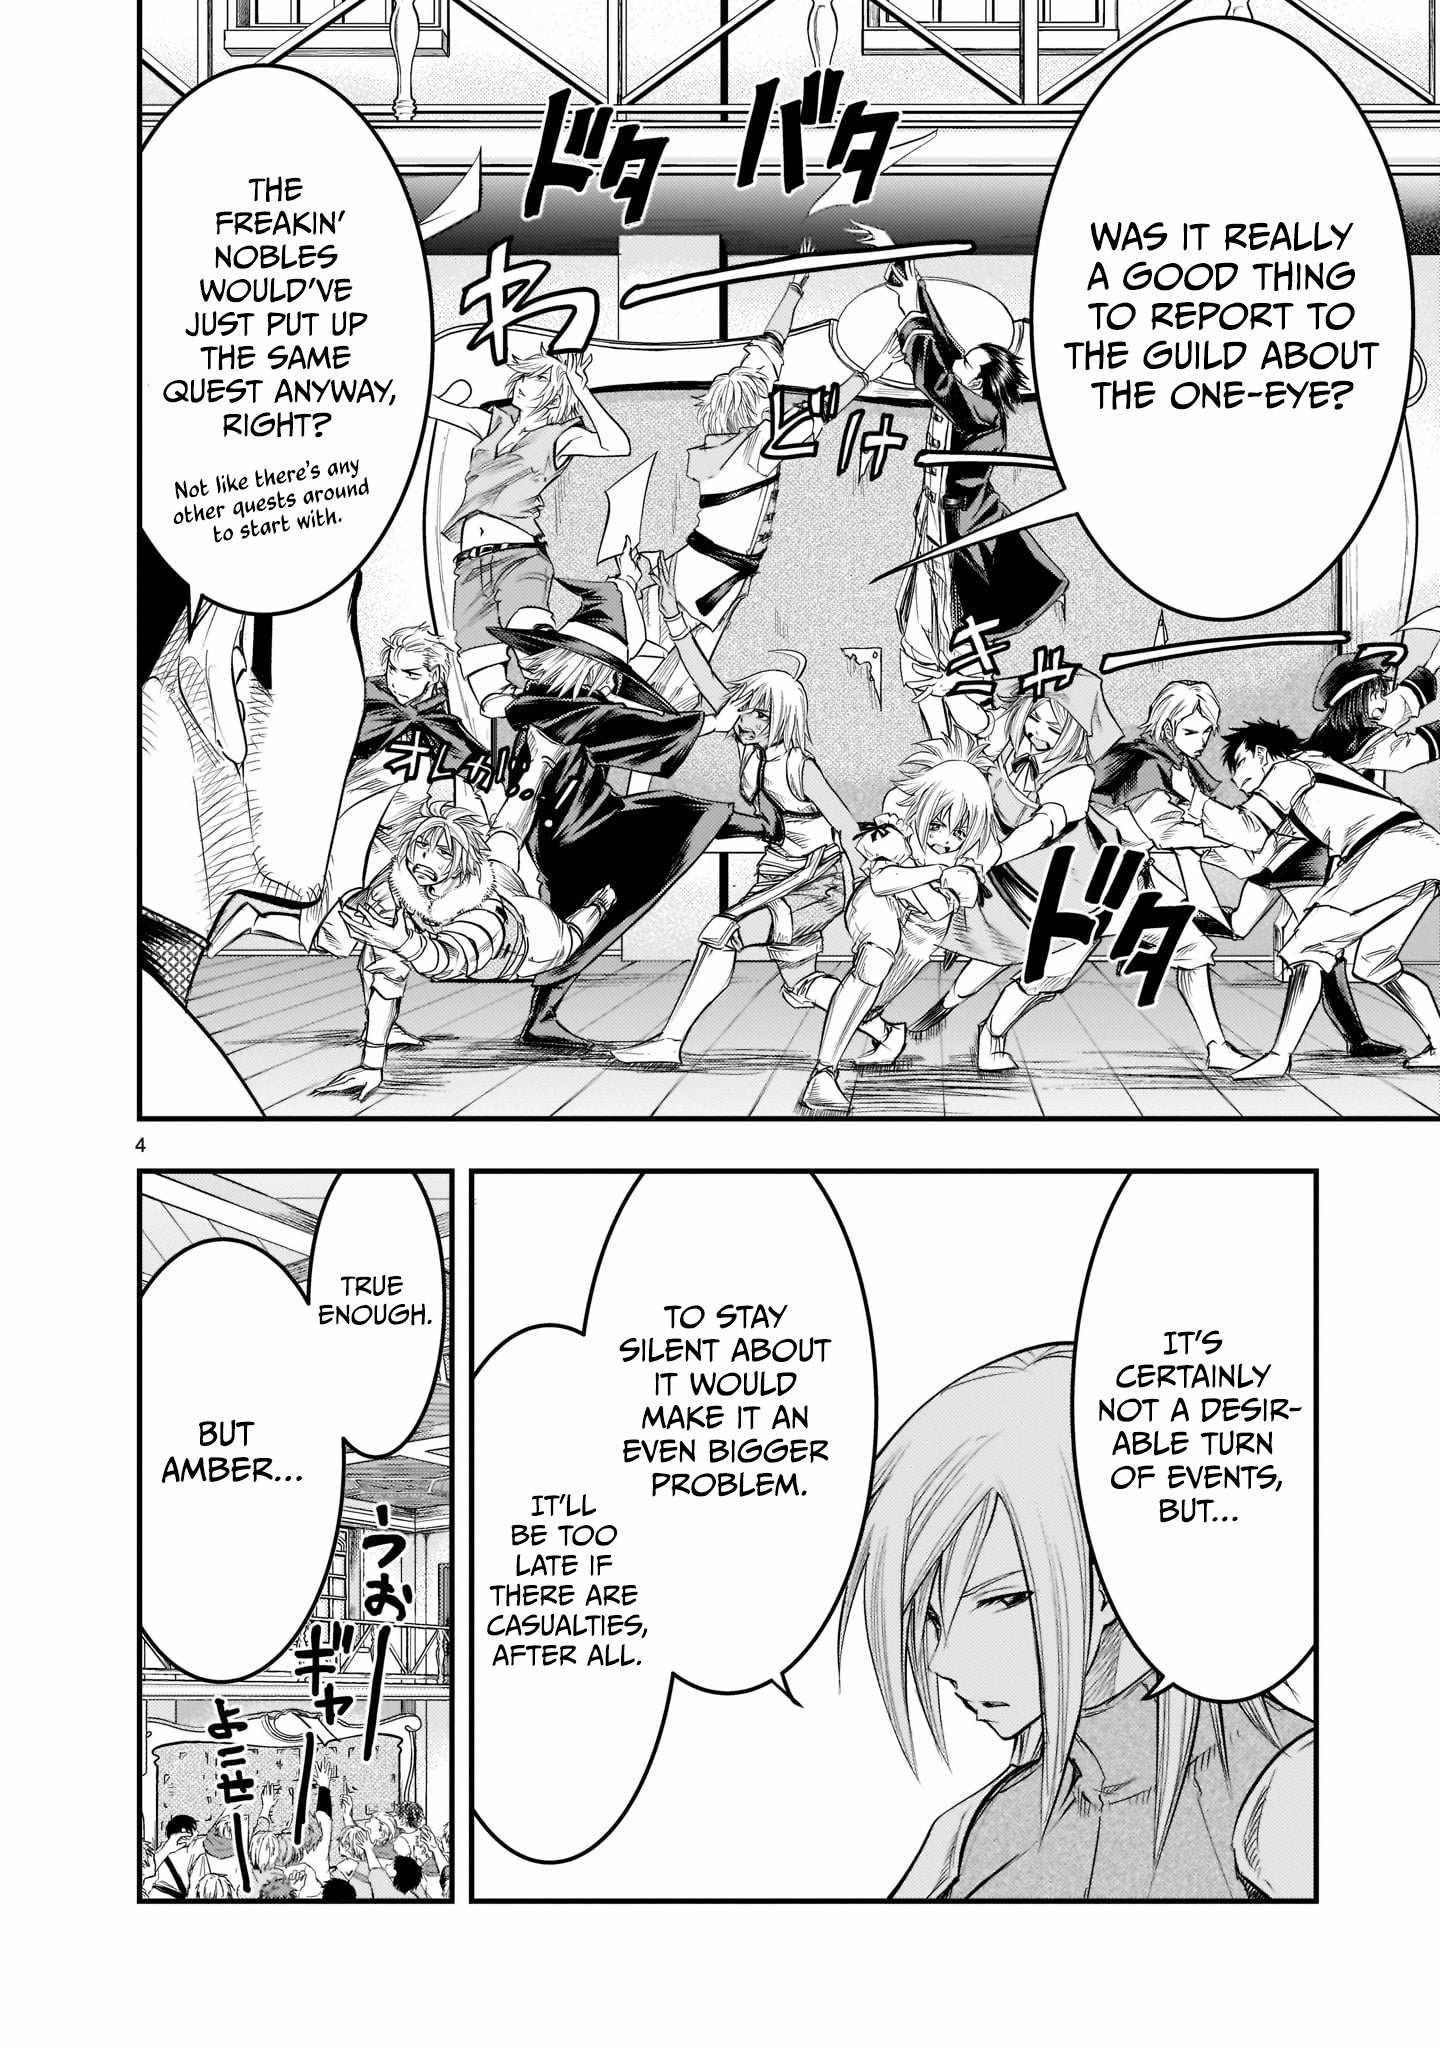 Re-Employment of the Former Strongest Hero Chapter 3